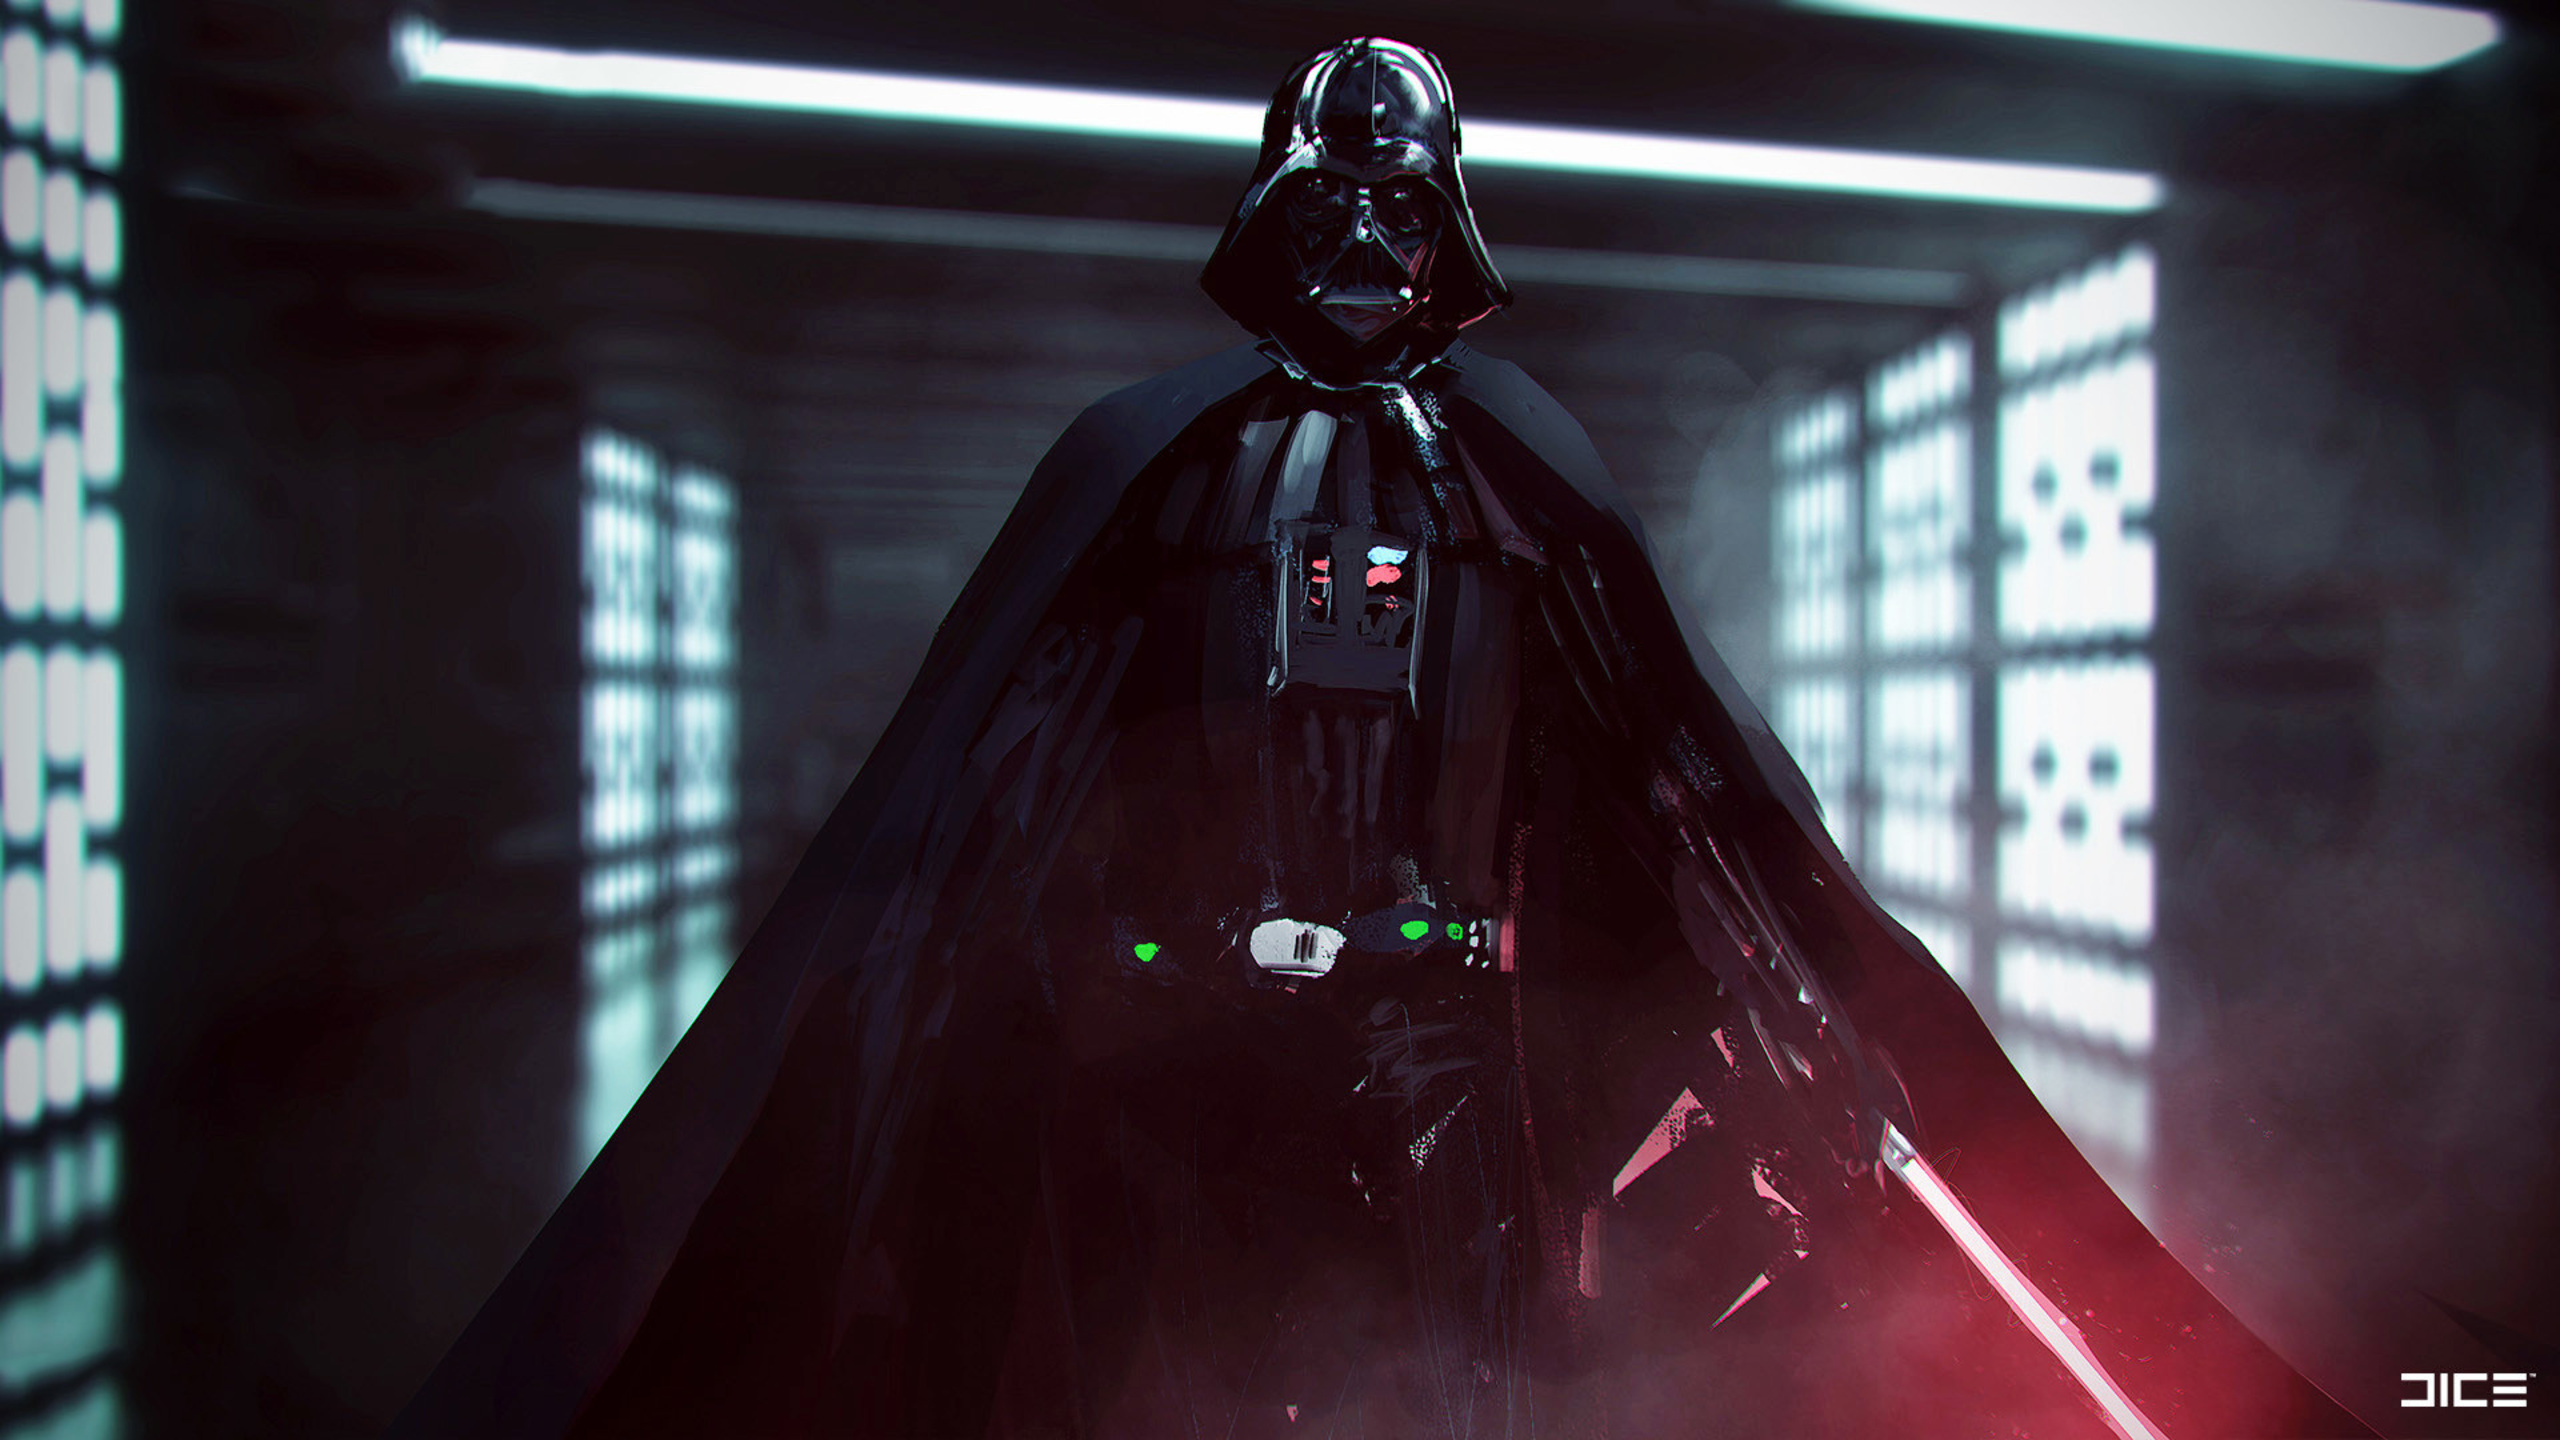 2560x1440 Darth Vader Star Wars Battlefront 2 Concept Art 1440P Resolution  HD 4k Wallpapers, Images, Backgrounds, Photos and Pictures